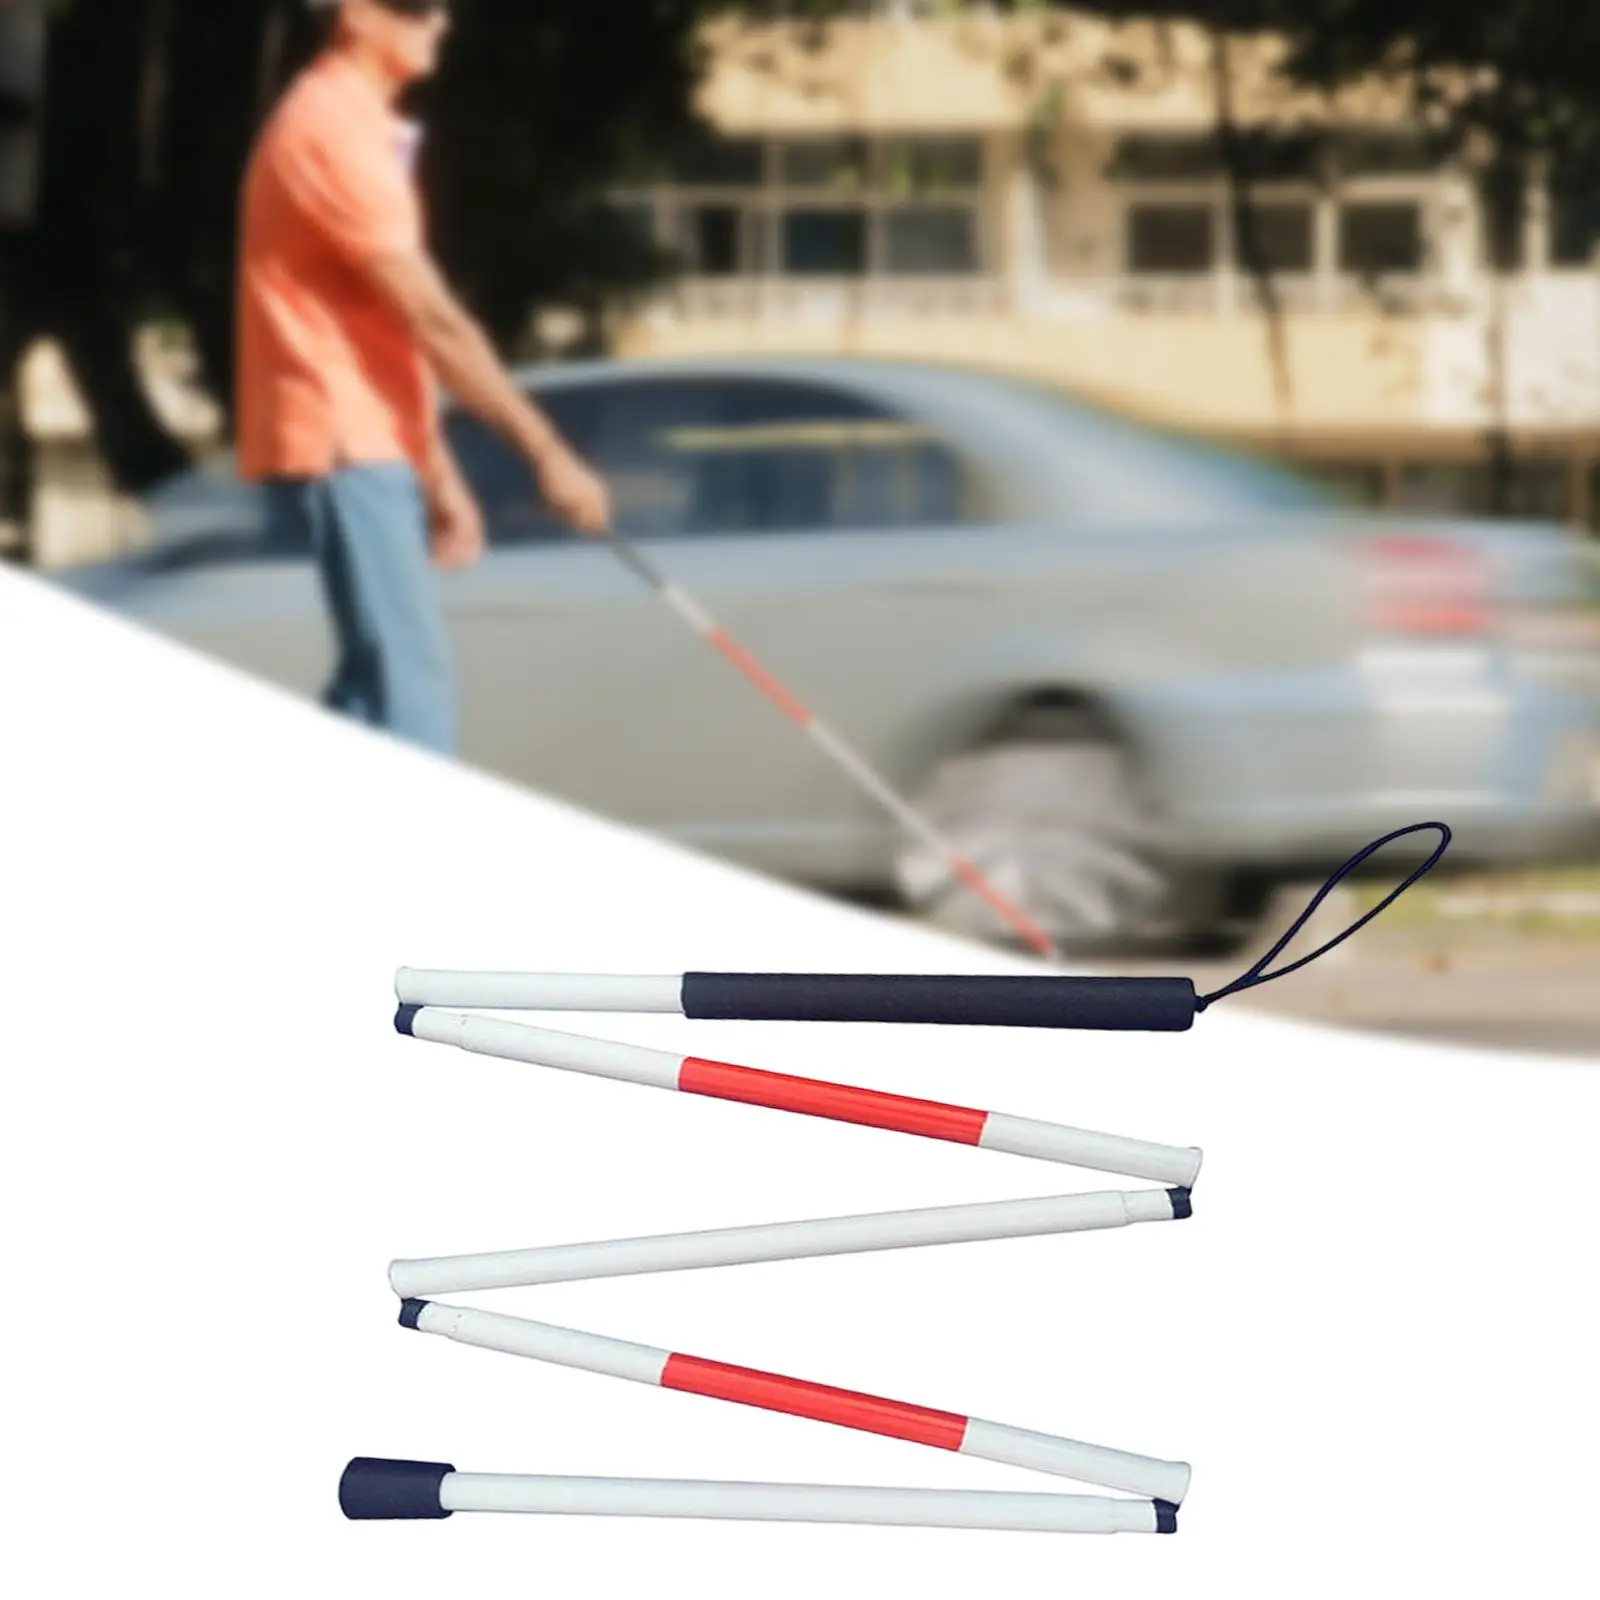 Folding Blind Cane Foldable Walking Stick Crutch for Visually Impaired